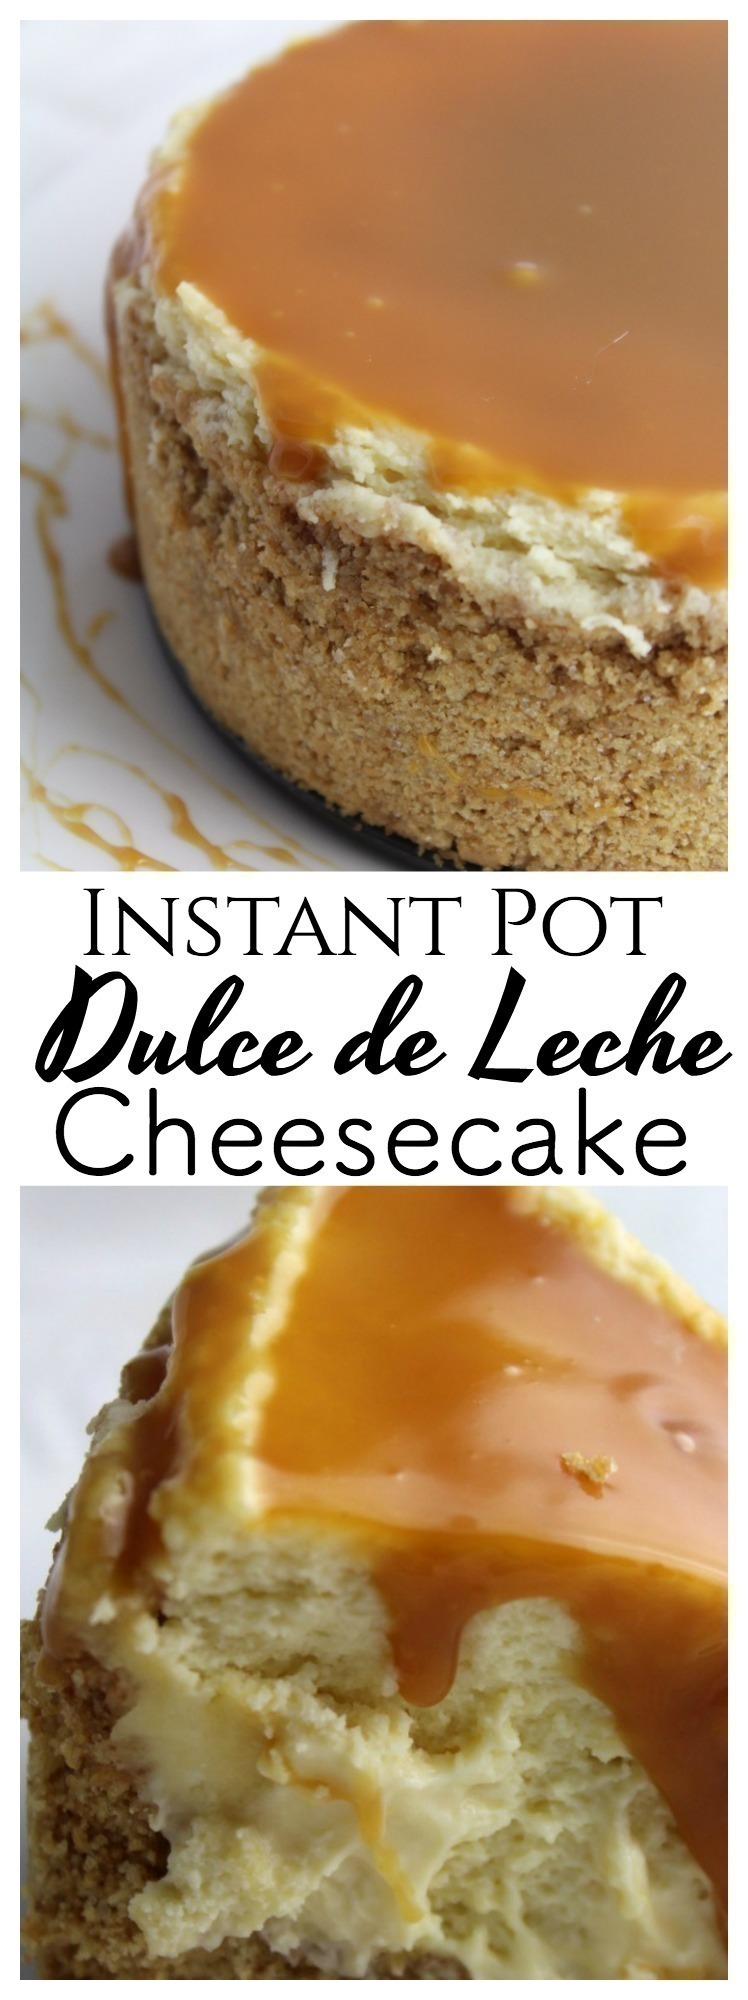 Creamy Instant Pot cheesecake topped with a deliciously rich caramel sauce - oh my gosh, this is SO good!